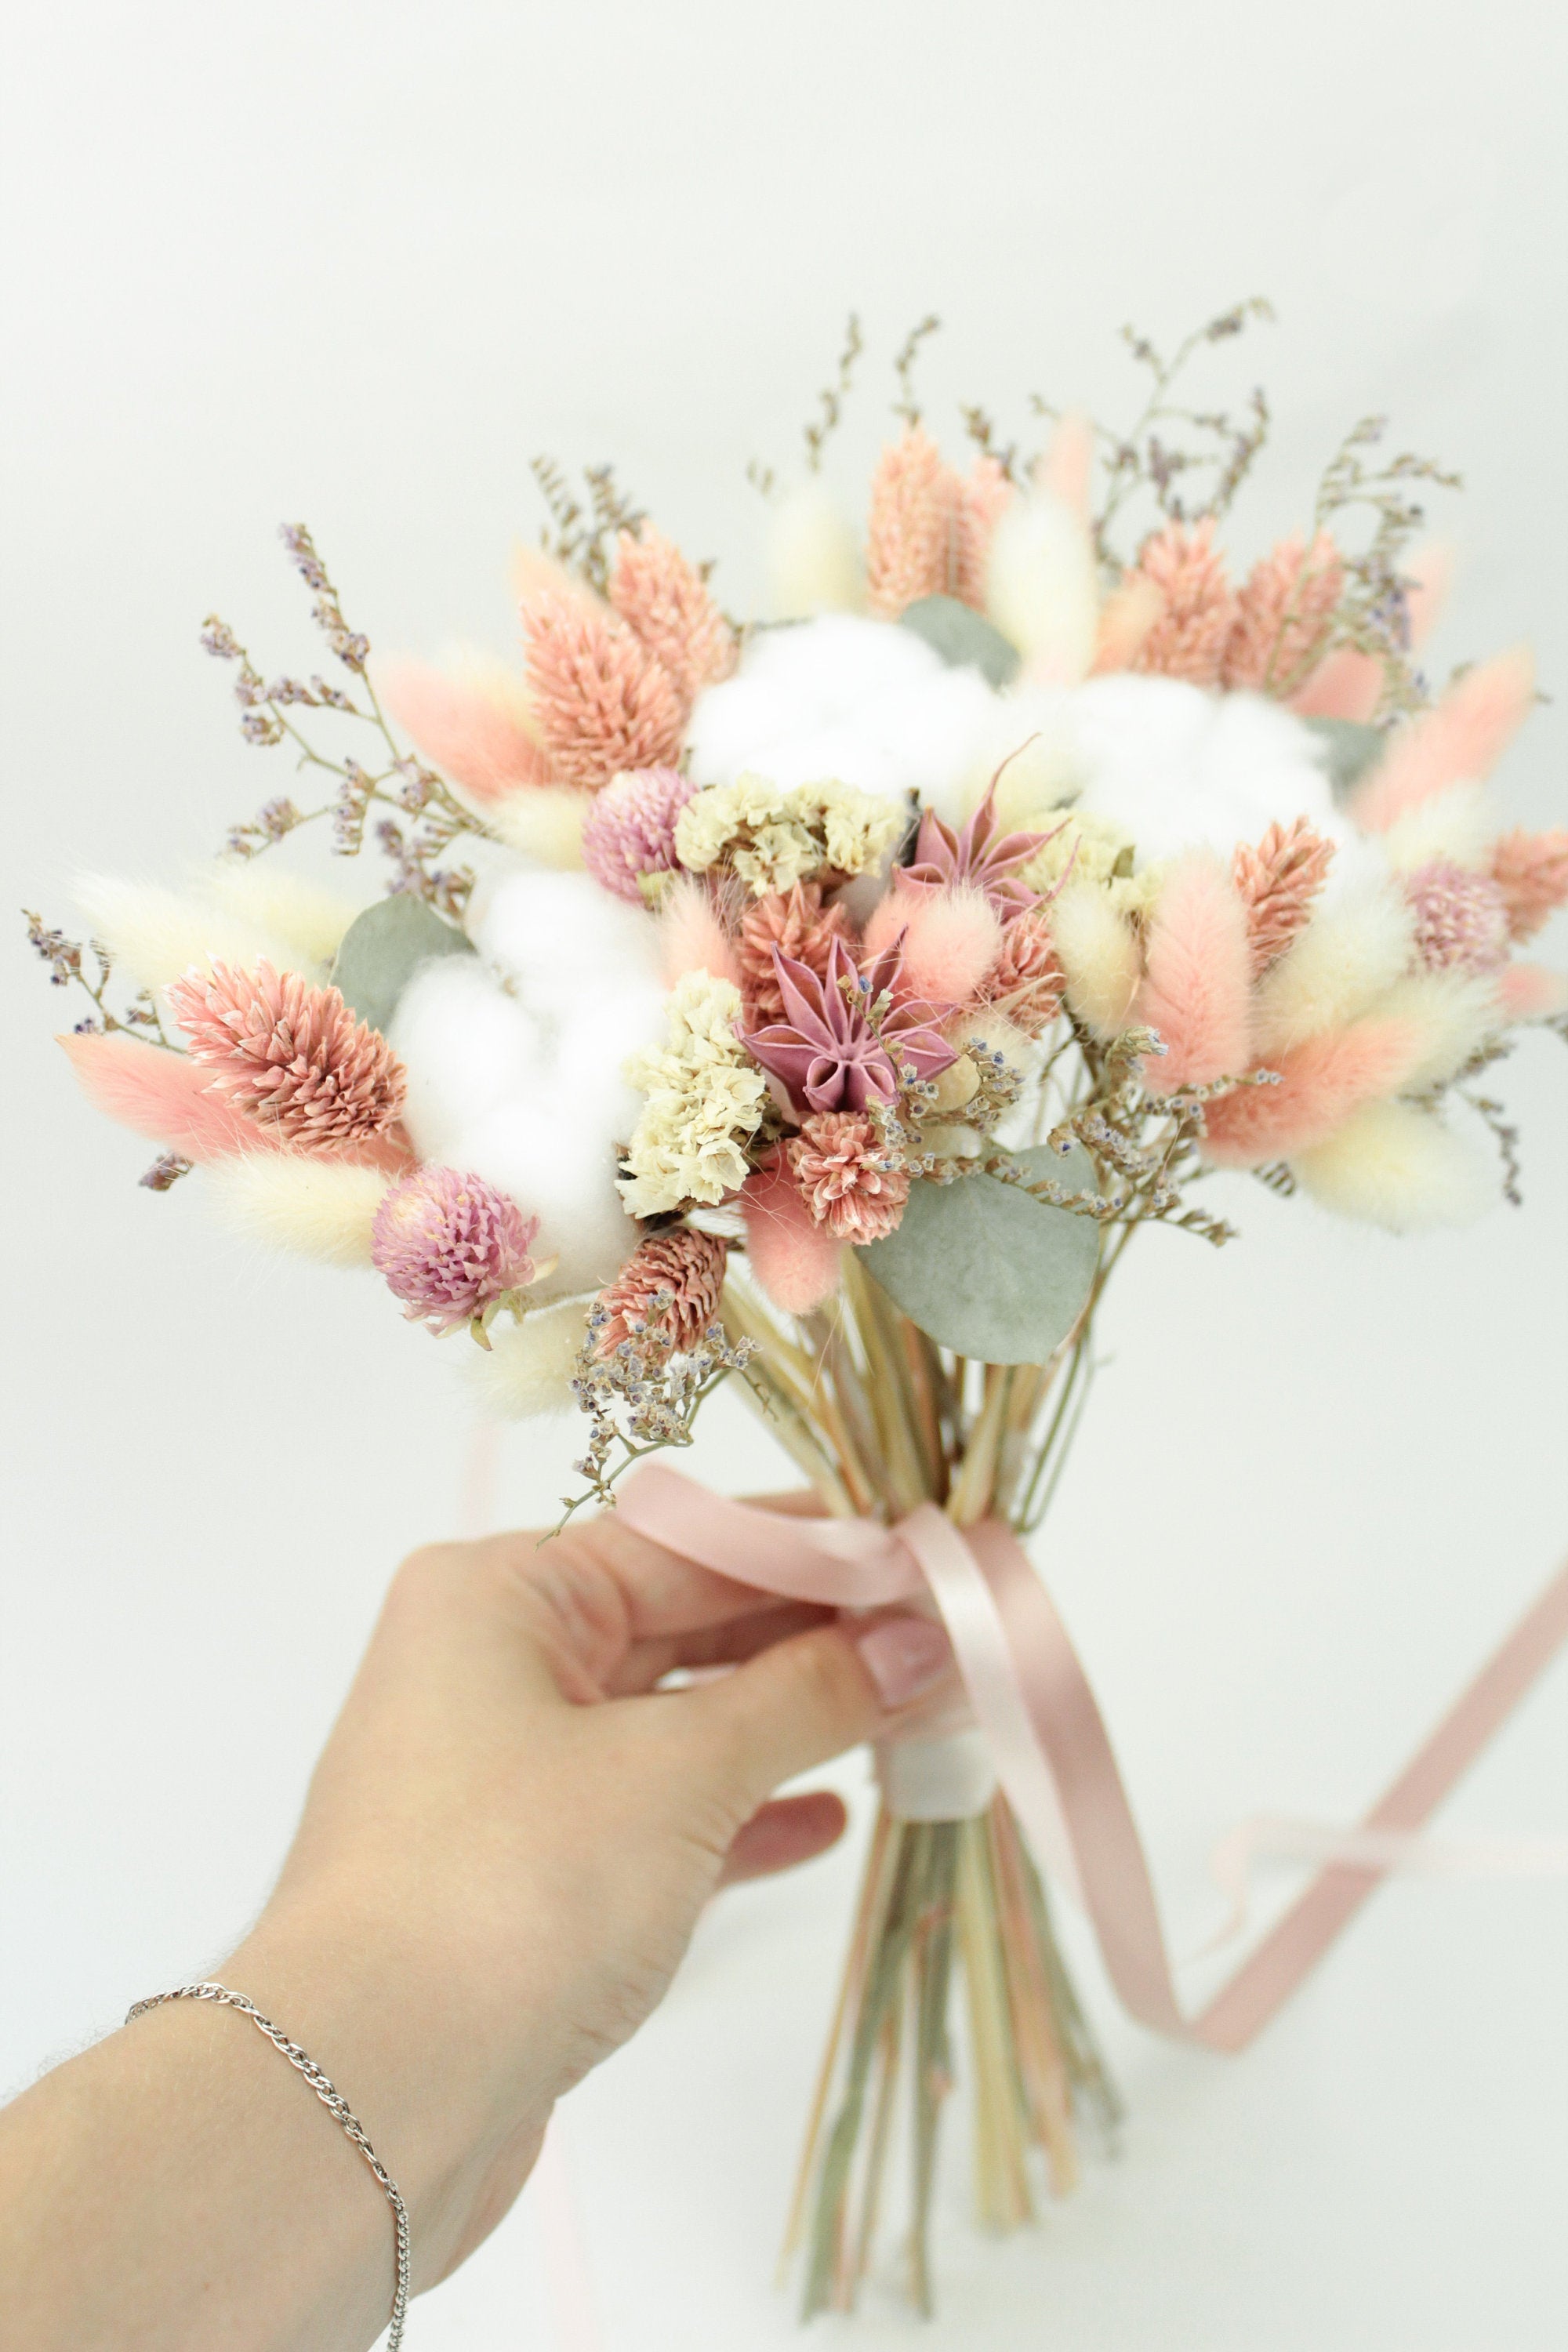 Pink and White Bridal Bouquet, Dried Flowers Bouquet, Dried Flowers Bridesmaid Bouquet, Cotton Bouquet, Bridal Bouquet BOHO, Bride Bouquet